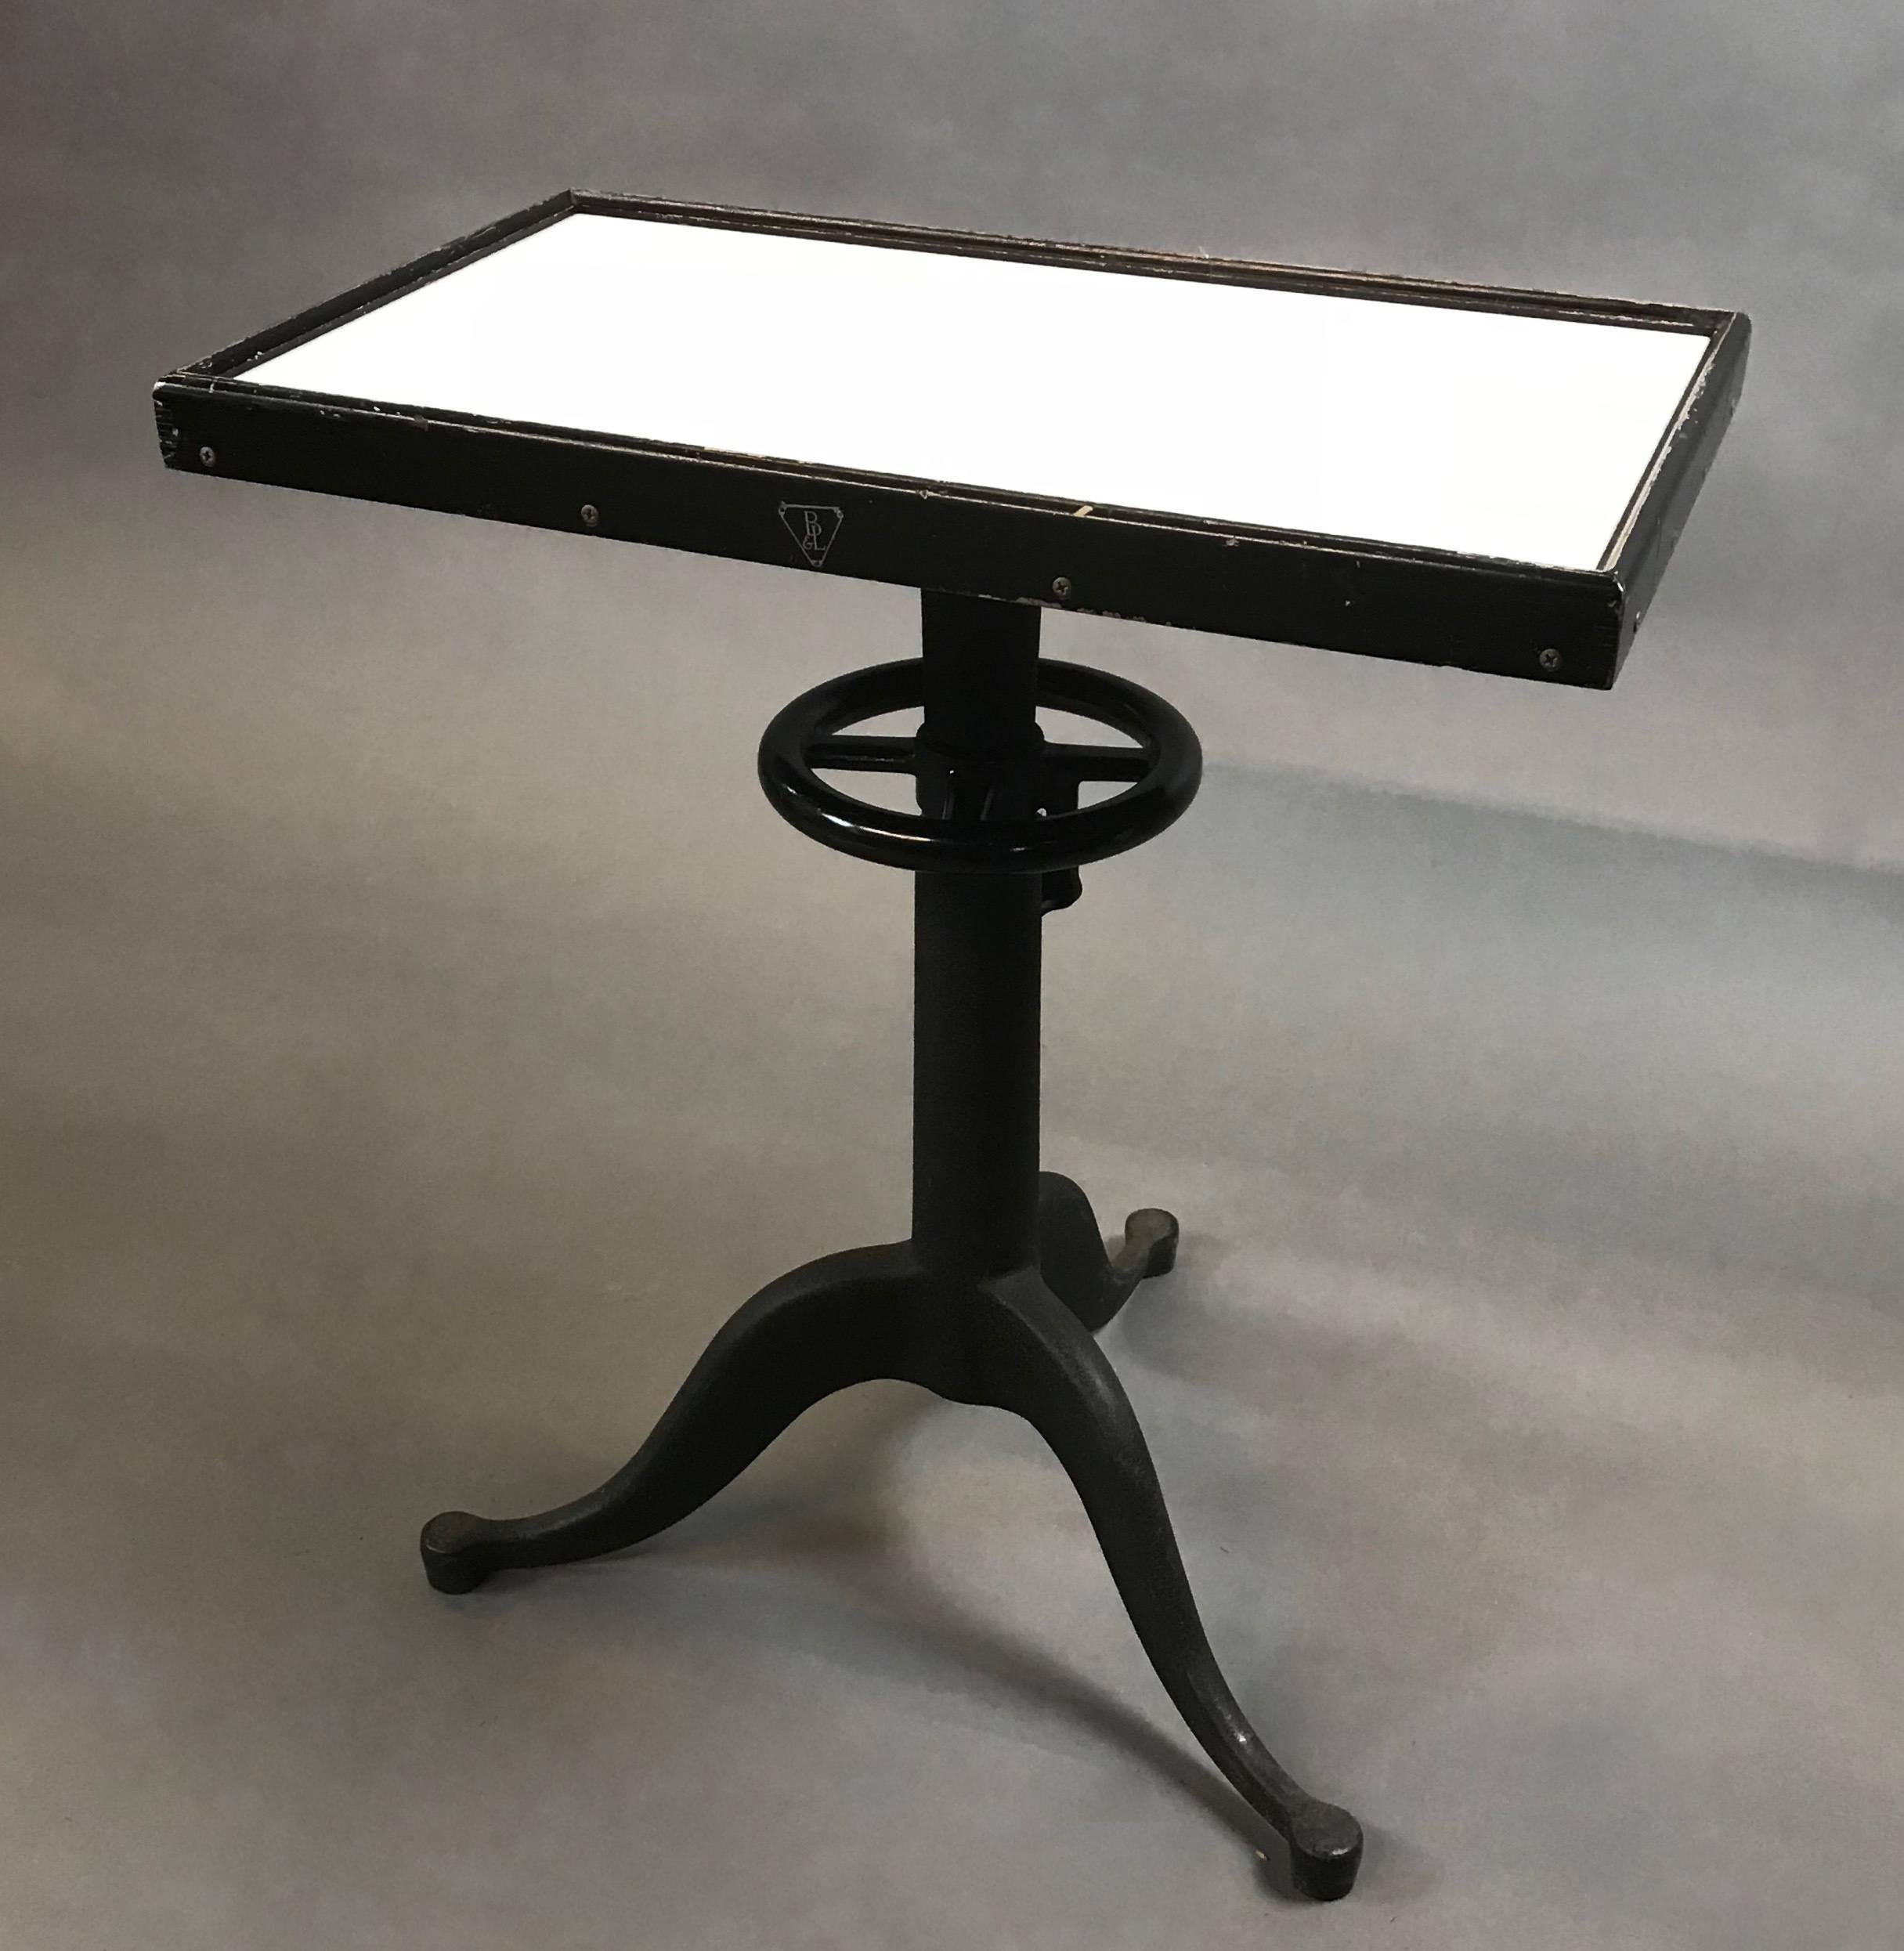 Industrial, optometry examination, table by Bausch & Lomb features a milk glass top in a wood frame atop a height-adjustable, pedestal cast iron and steel base.